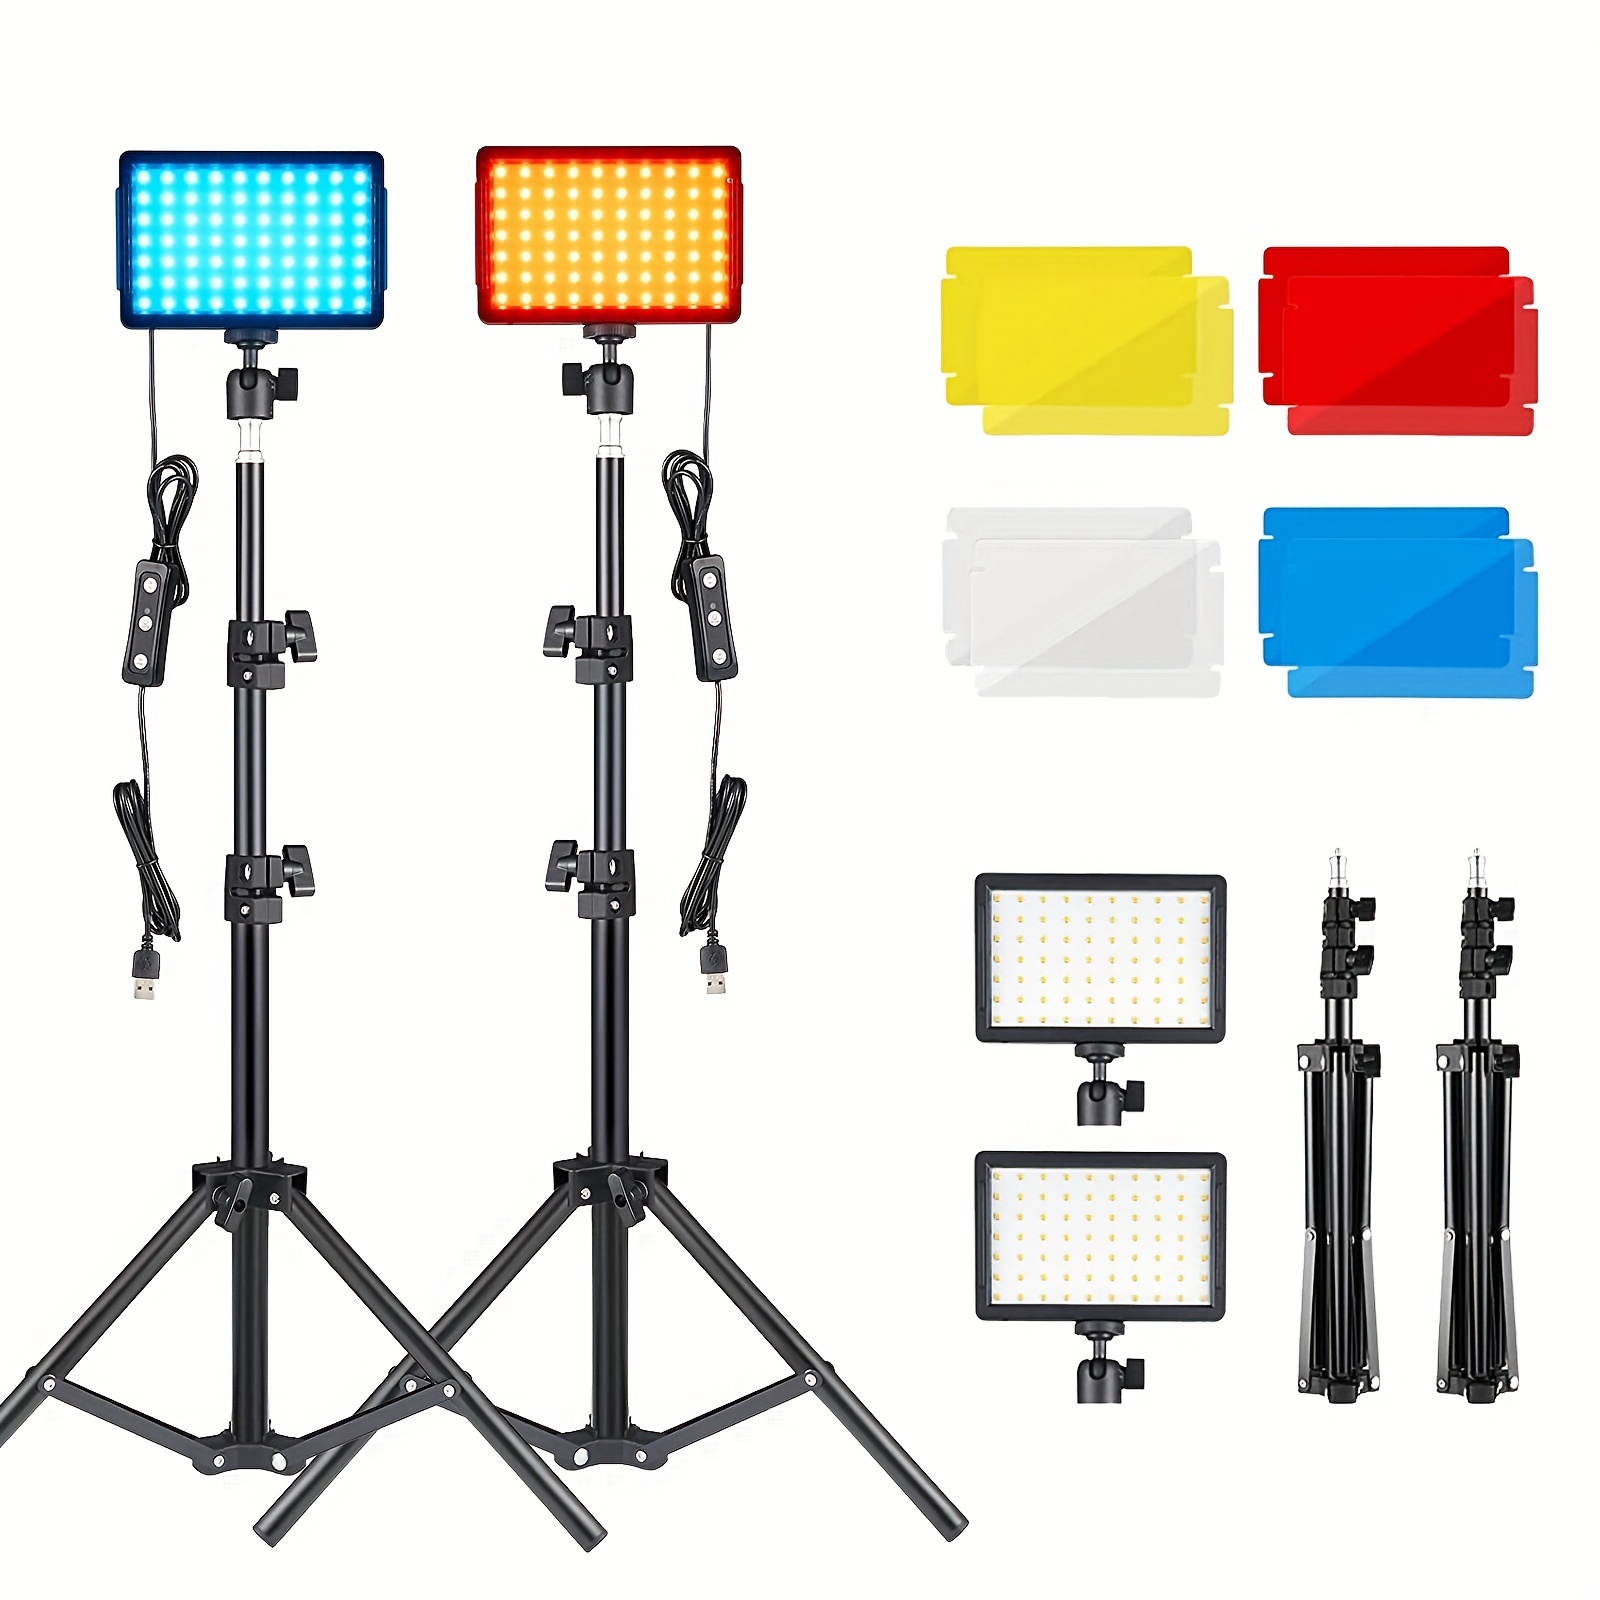  RGB Video Camera Light,Portable Bi-Color LED Panel Lights for  DSLR Cameras Photography Lighting,2600-8500K Rechargeable 4000mAh Photo  Video Lights,CRI95+/10 Light Effects for Video Conference/Gaming :  Electronics